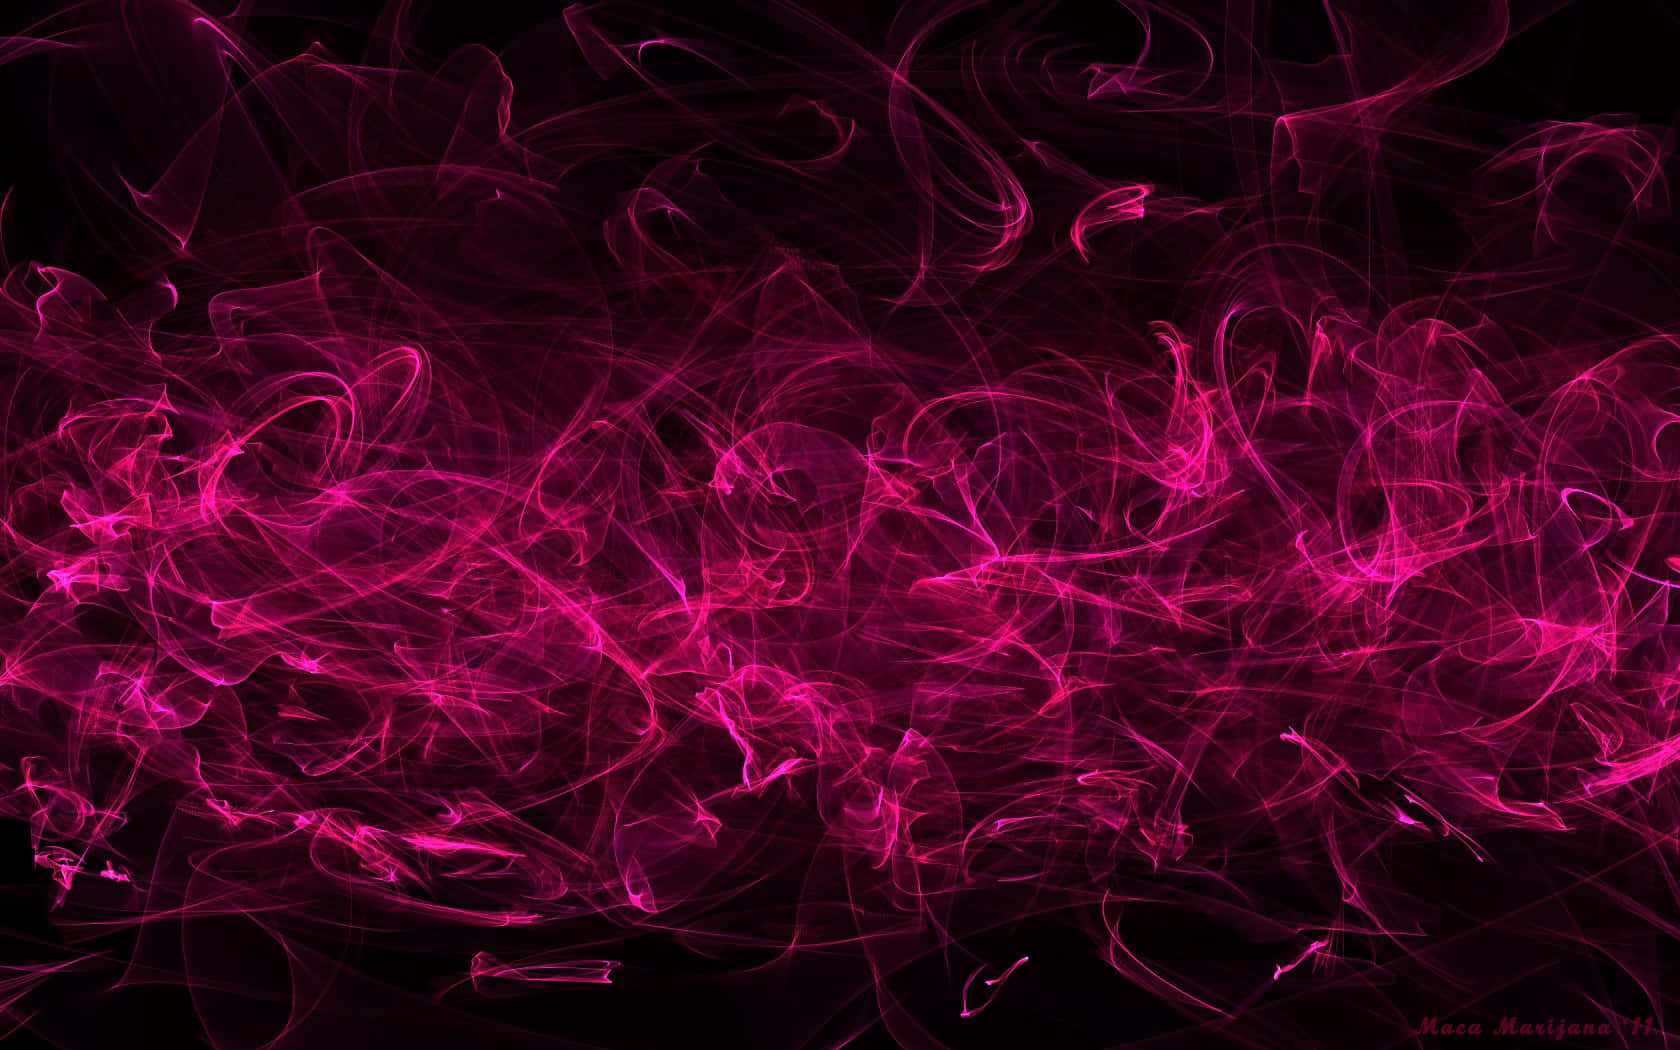 Large Mass Of Pink Flames Wallpaper